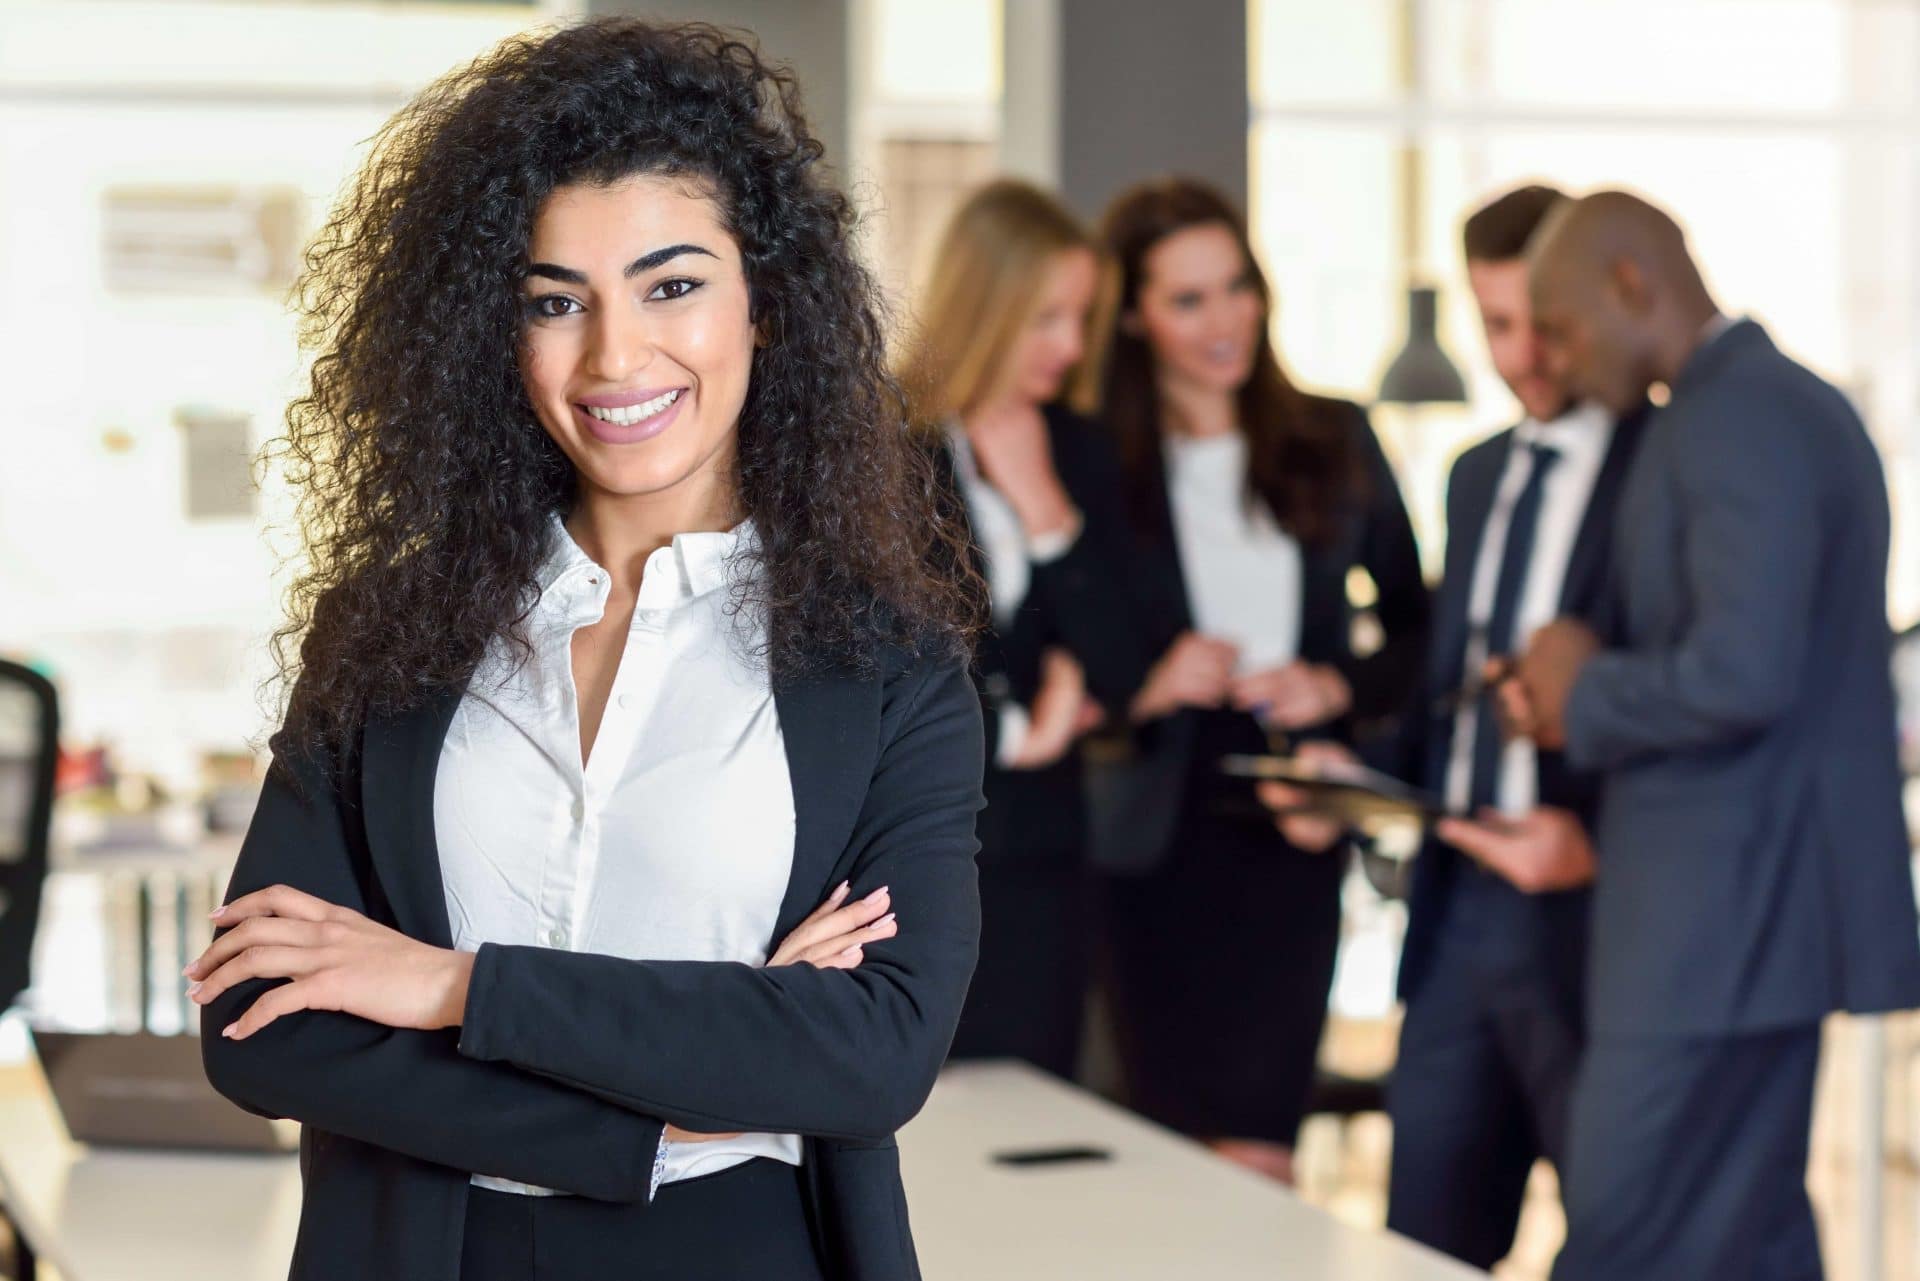 Female leaders changing the face of the workplace